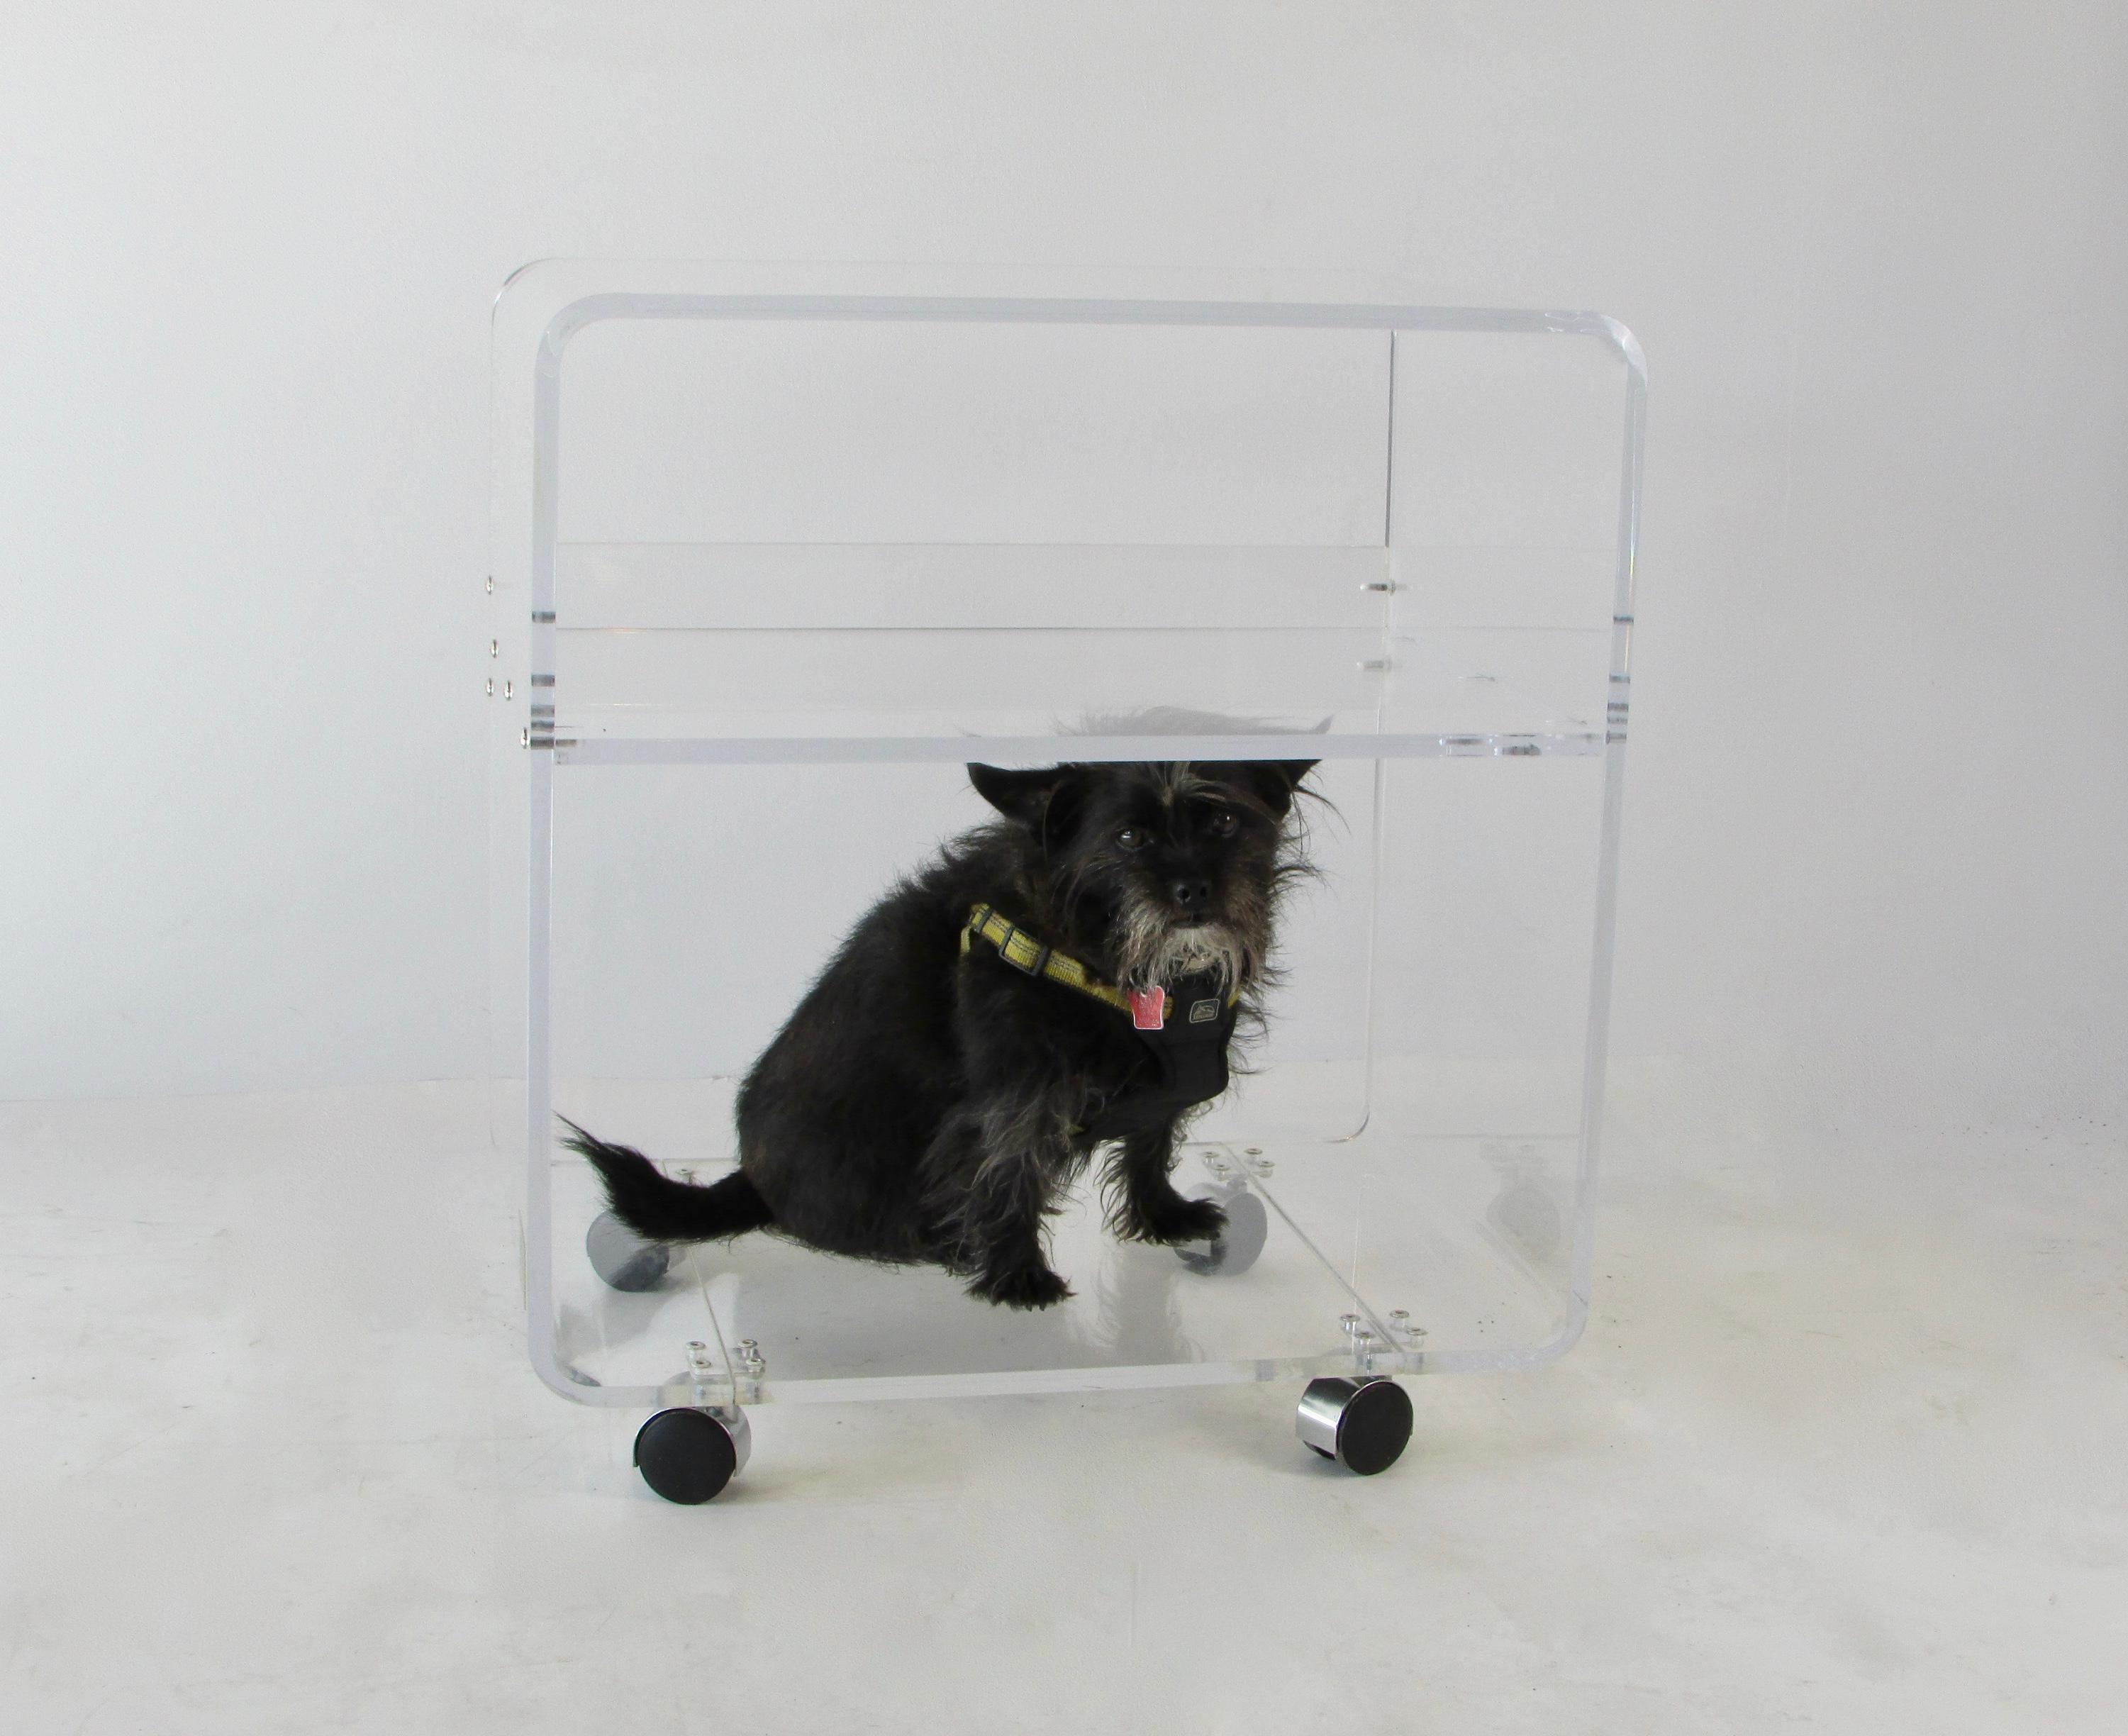 A waterfall edge acrylic rolling bar/serving cart on chromed castors by AKKO, Inc., Lawrence, MA. Clean condition. I appreciate the diversity and mobility of the cart as well as it's lightness of being.
The model is my rescue dog, he is not included.